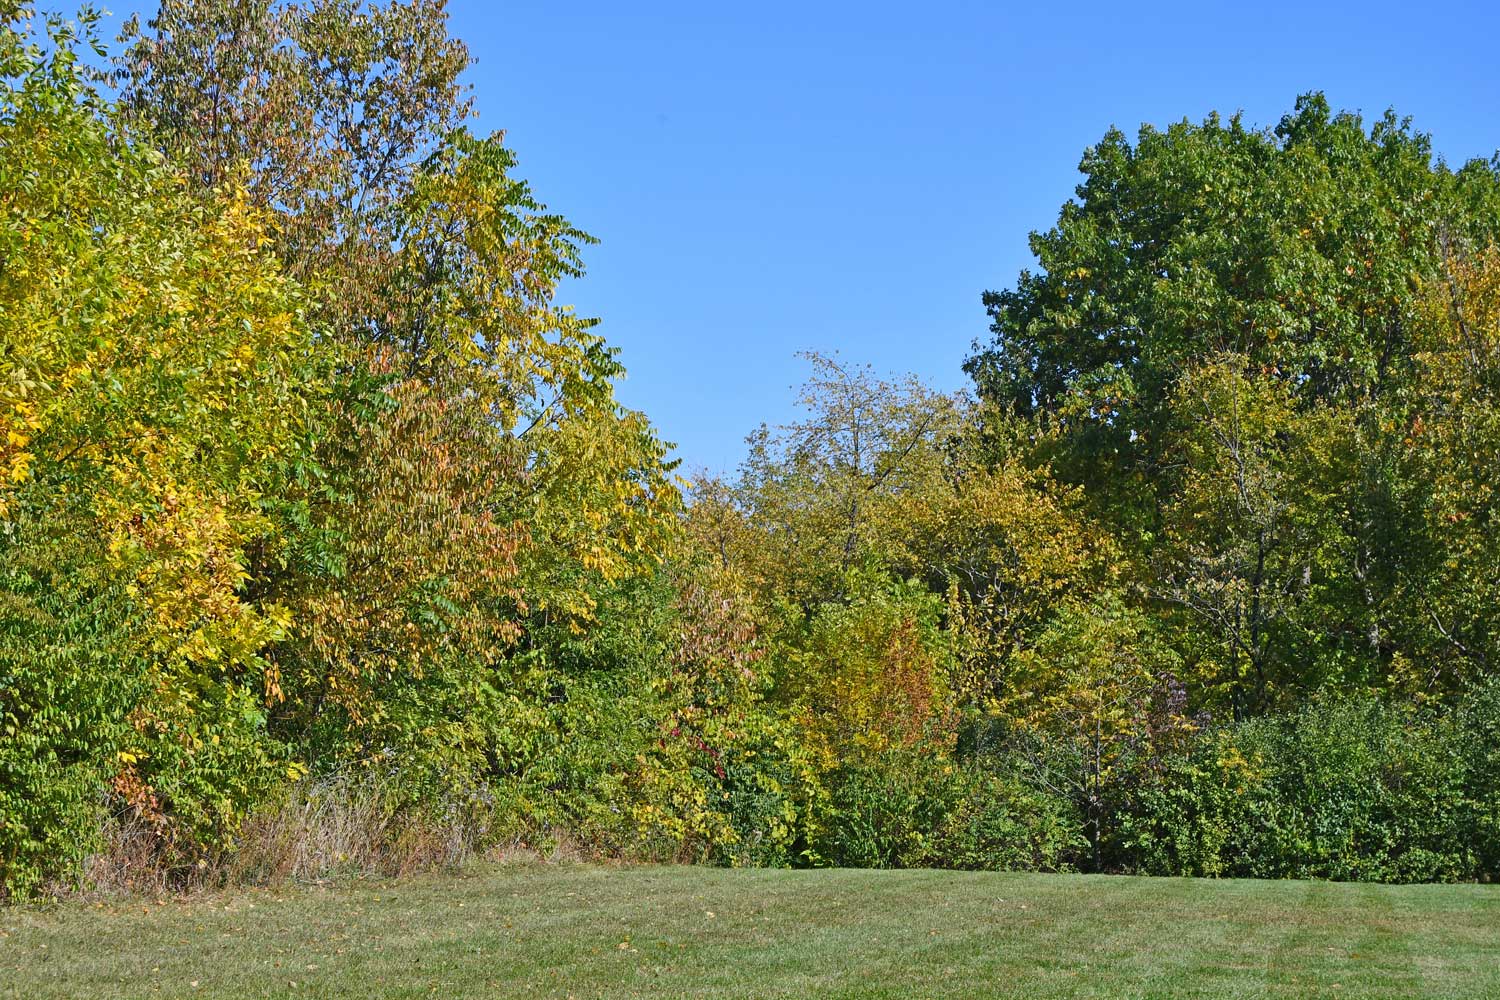 Trees near path covered with fall colored leaves.